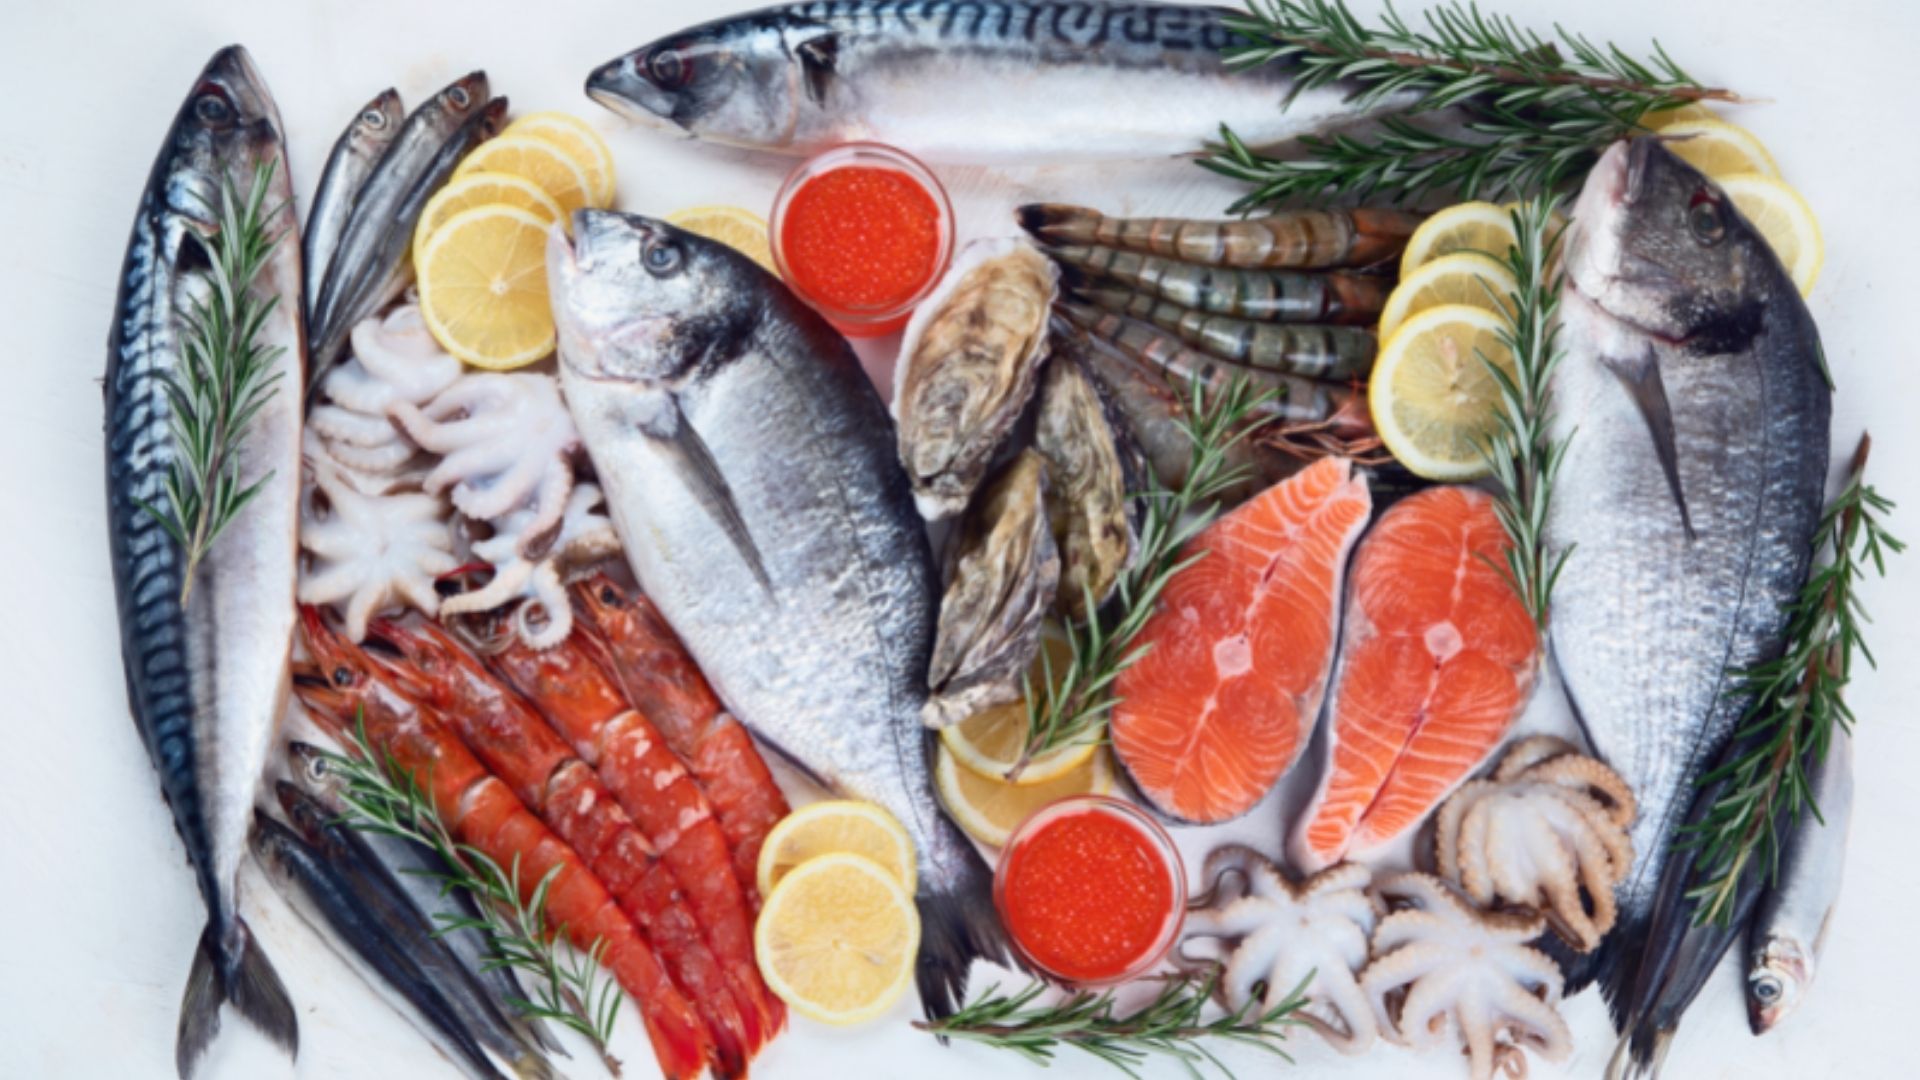 safe-handling-of-fish-and-shellfish-in-cold-chain-shipping